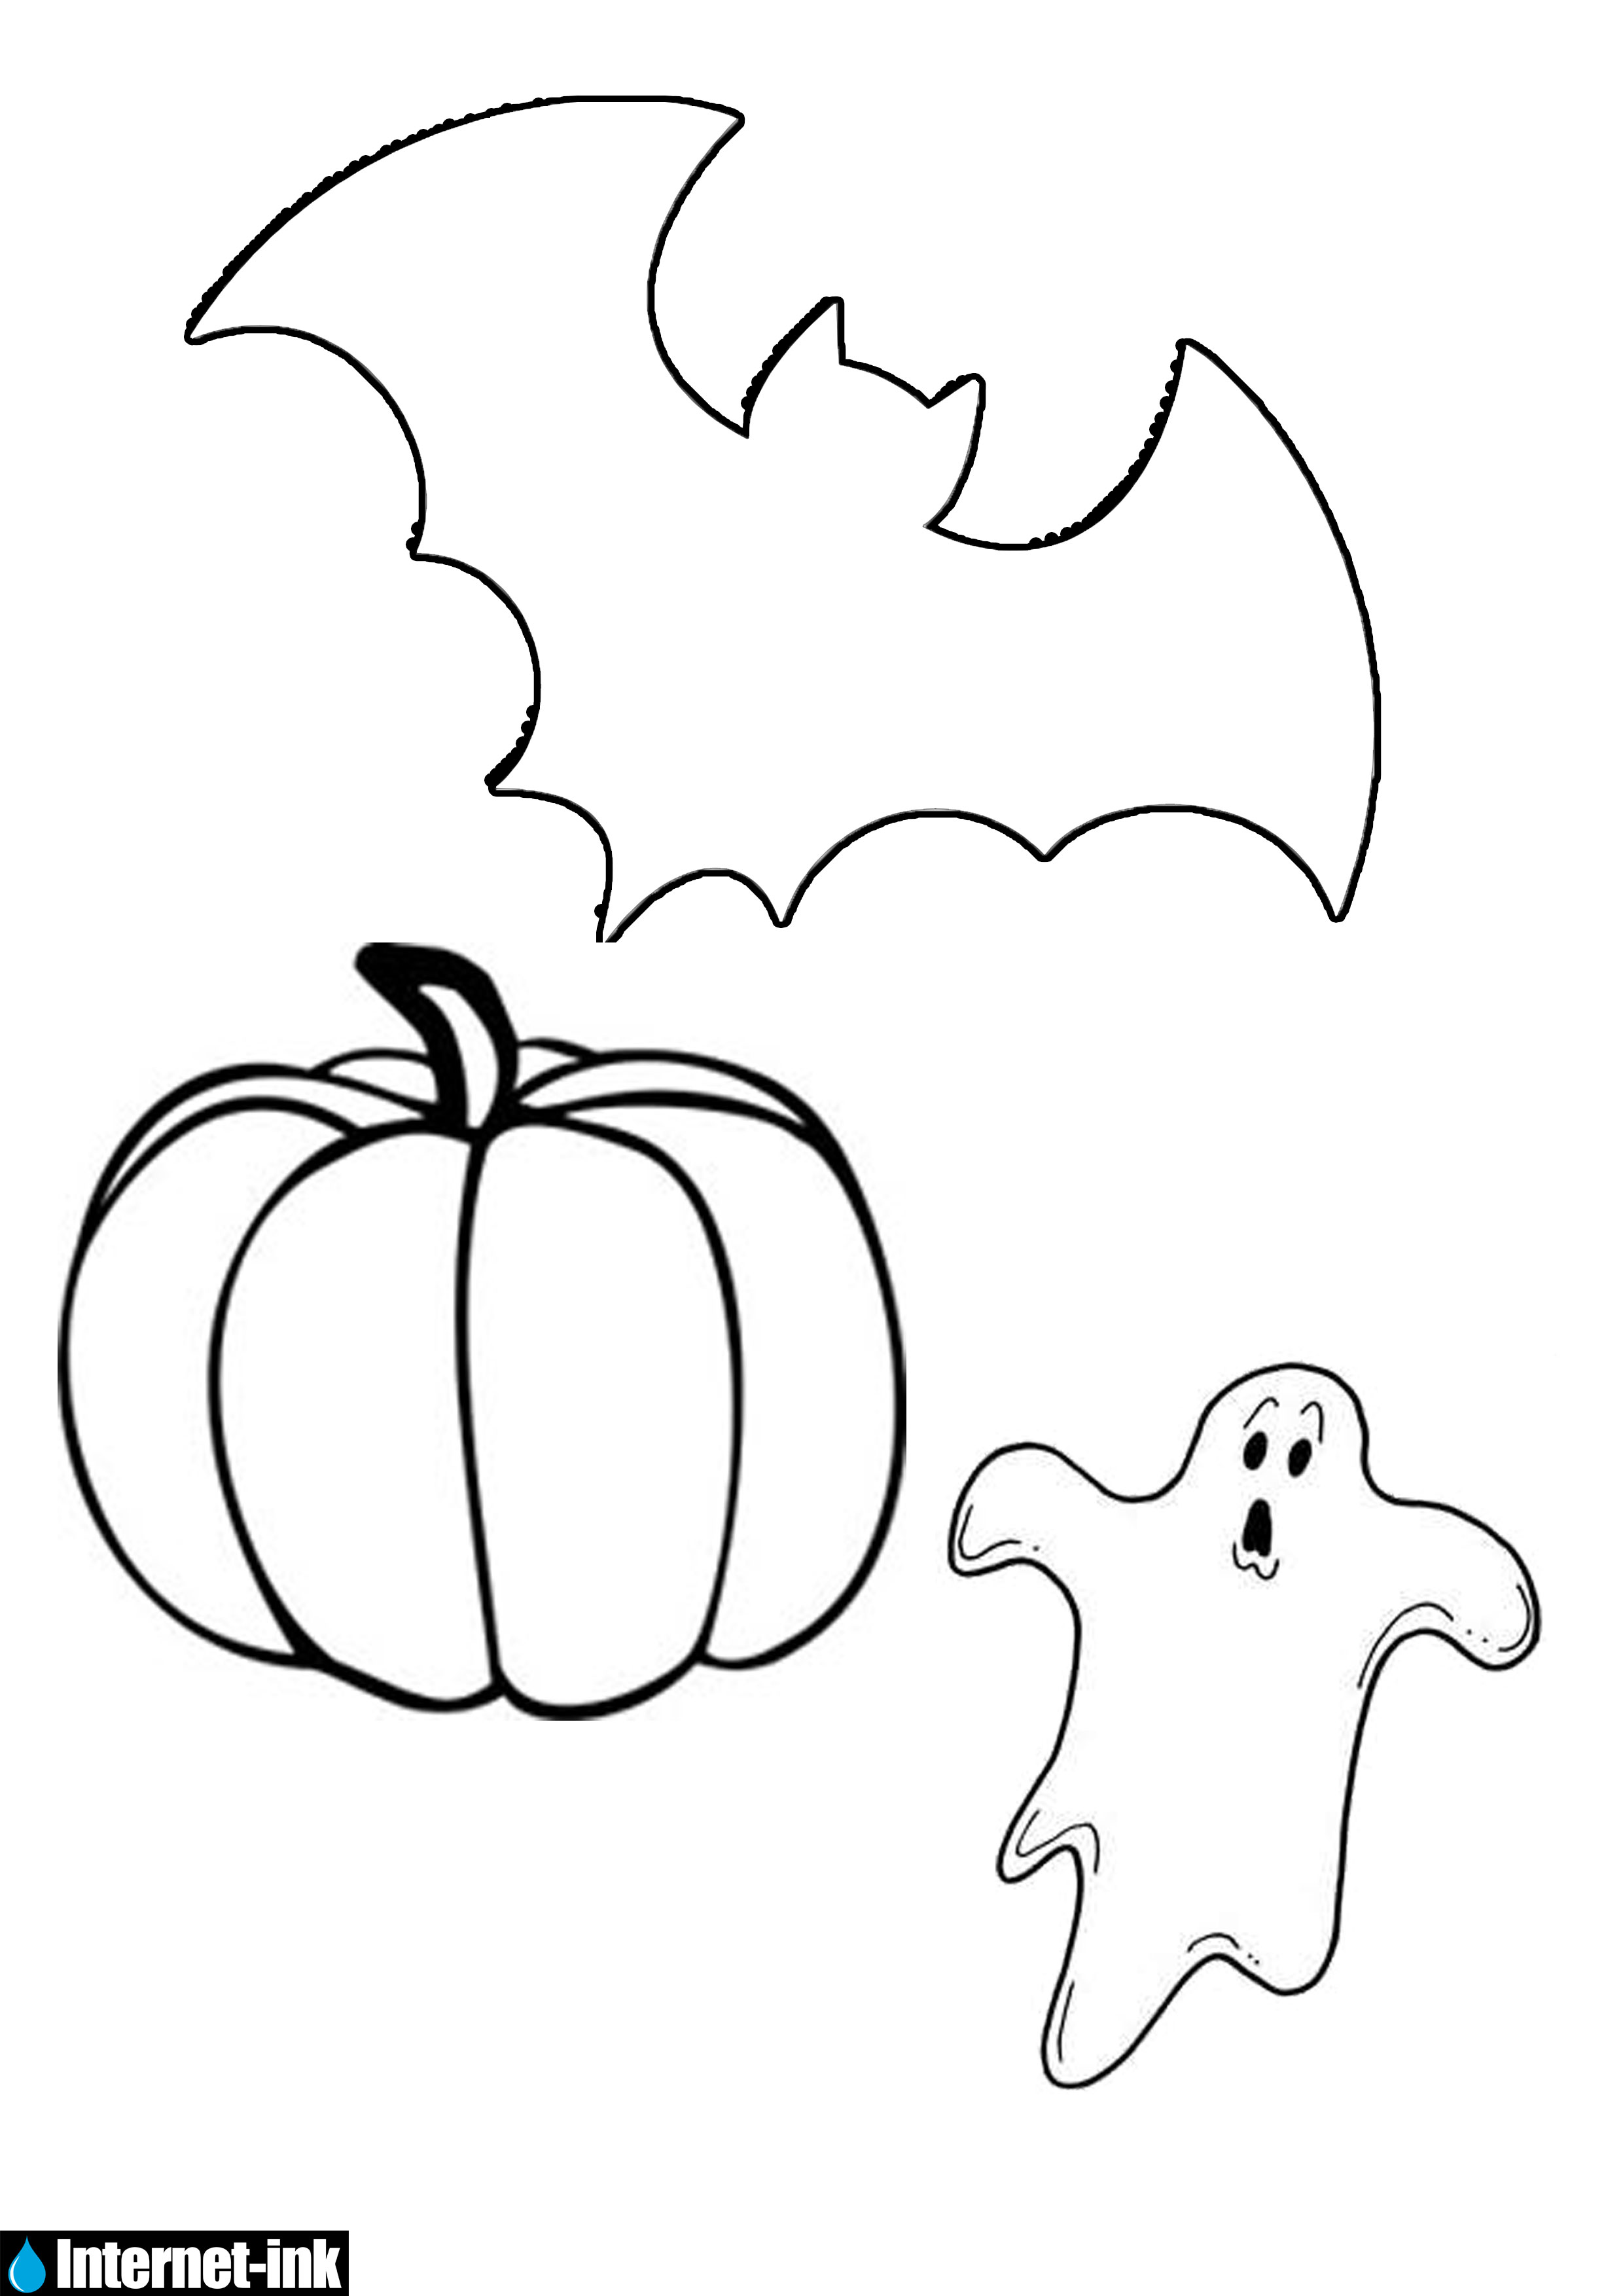 Printable Halloween Cut Out Decorations Ink Ukup